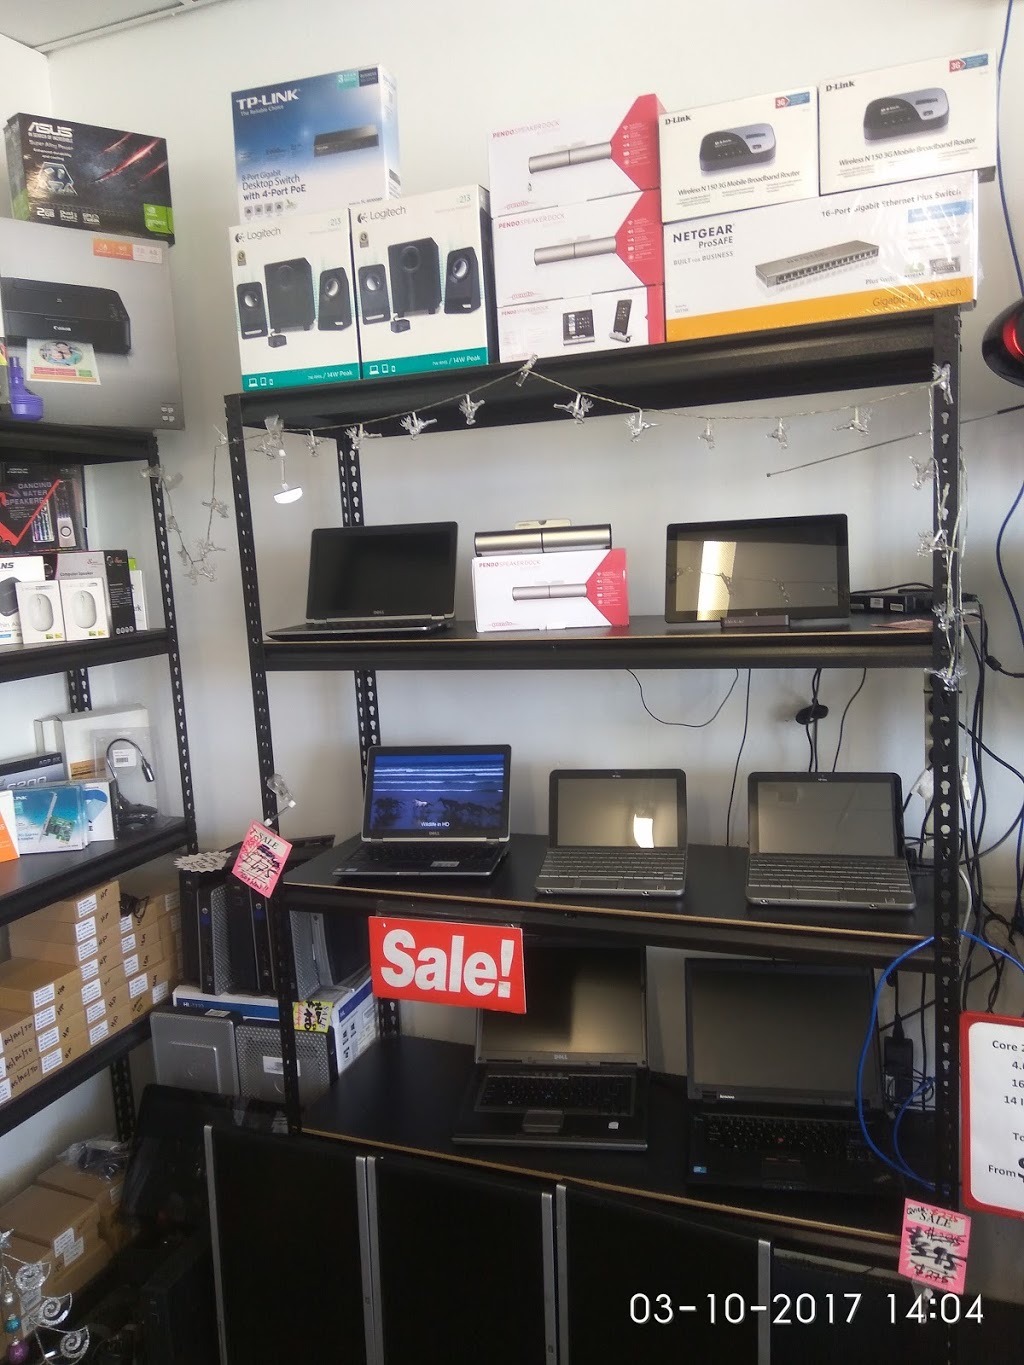 Get Connected IT | electronics store | 74 Granard Rd, Archerfield QLD 4108, Australia | 0731031251 OR +61 7 3103 1251